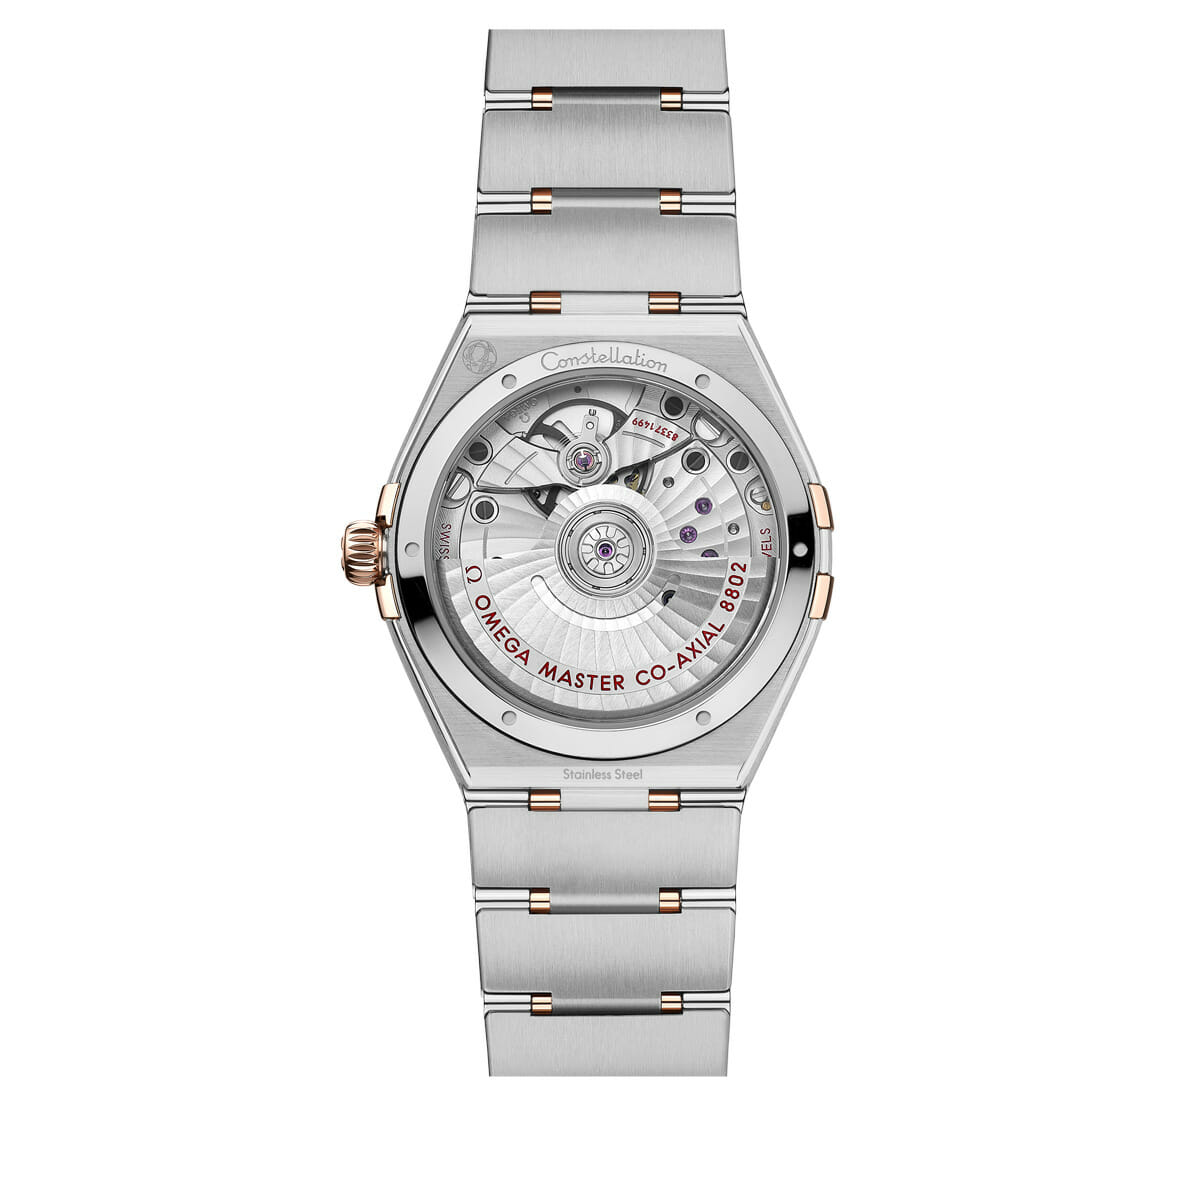 Constellation Co-Axial Master Chronometer 34mm Watch